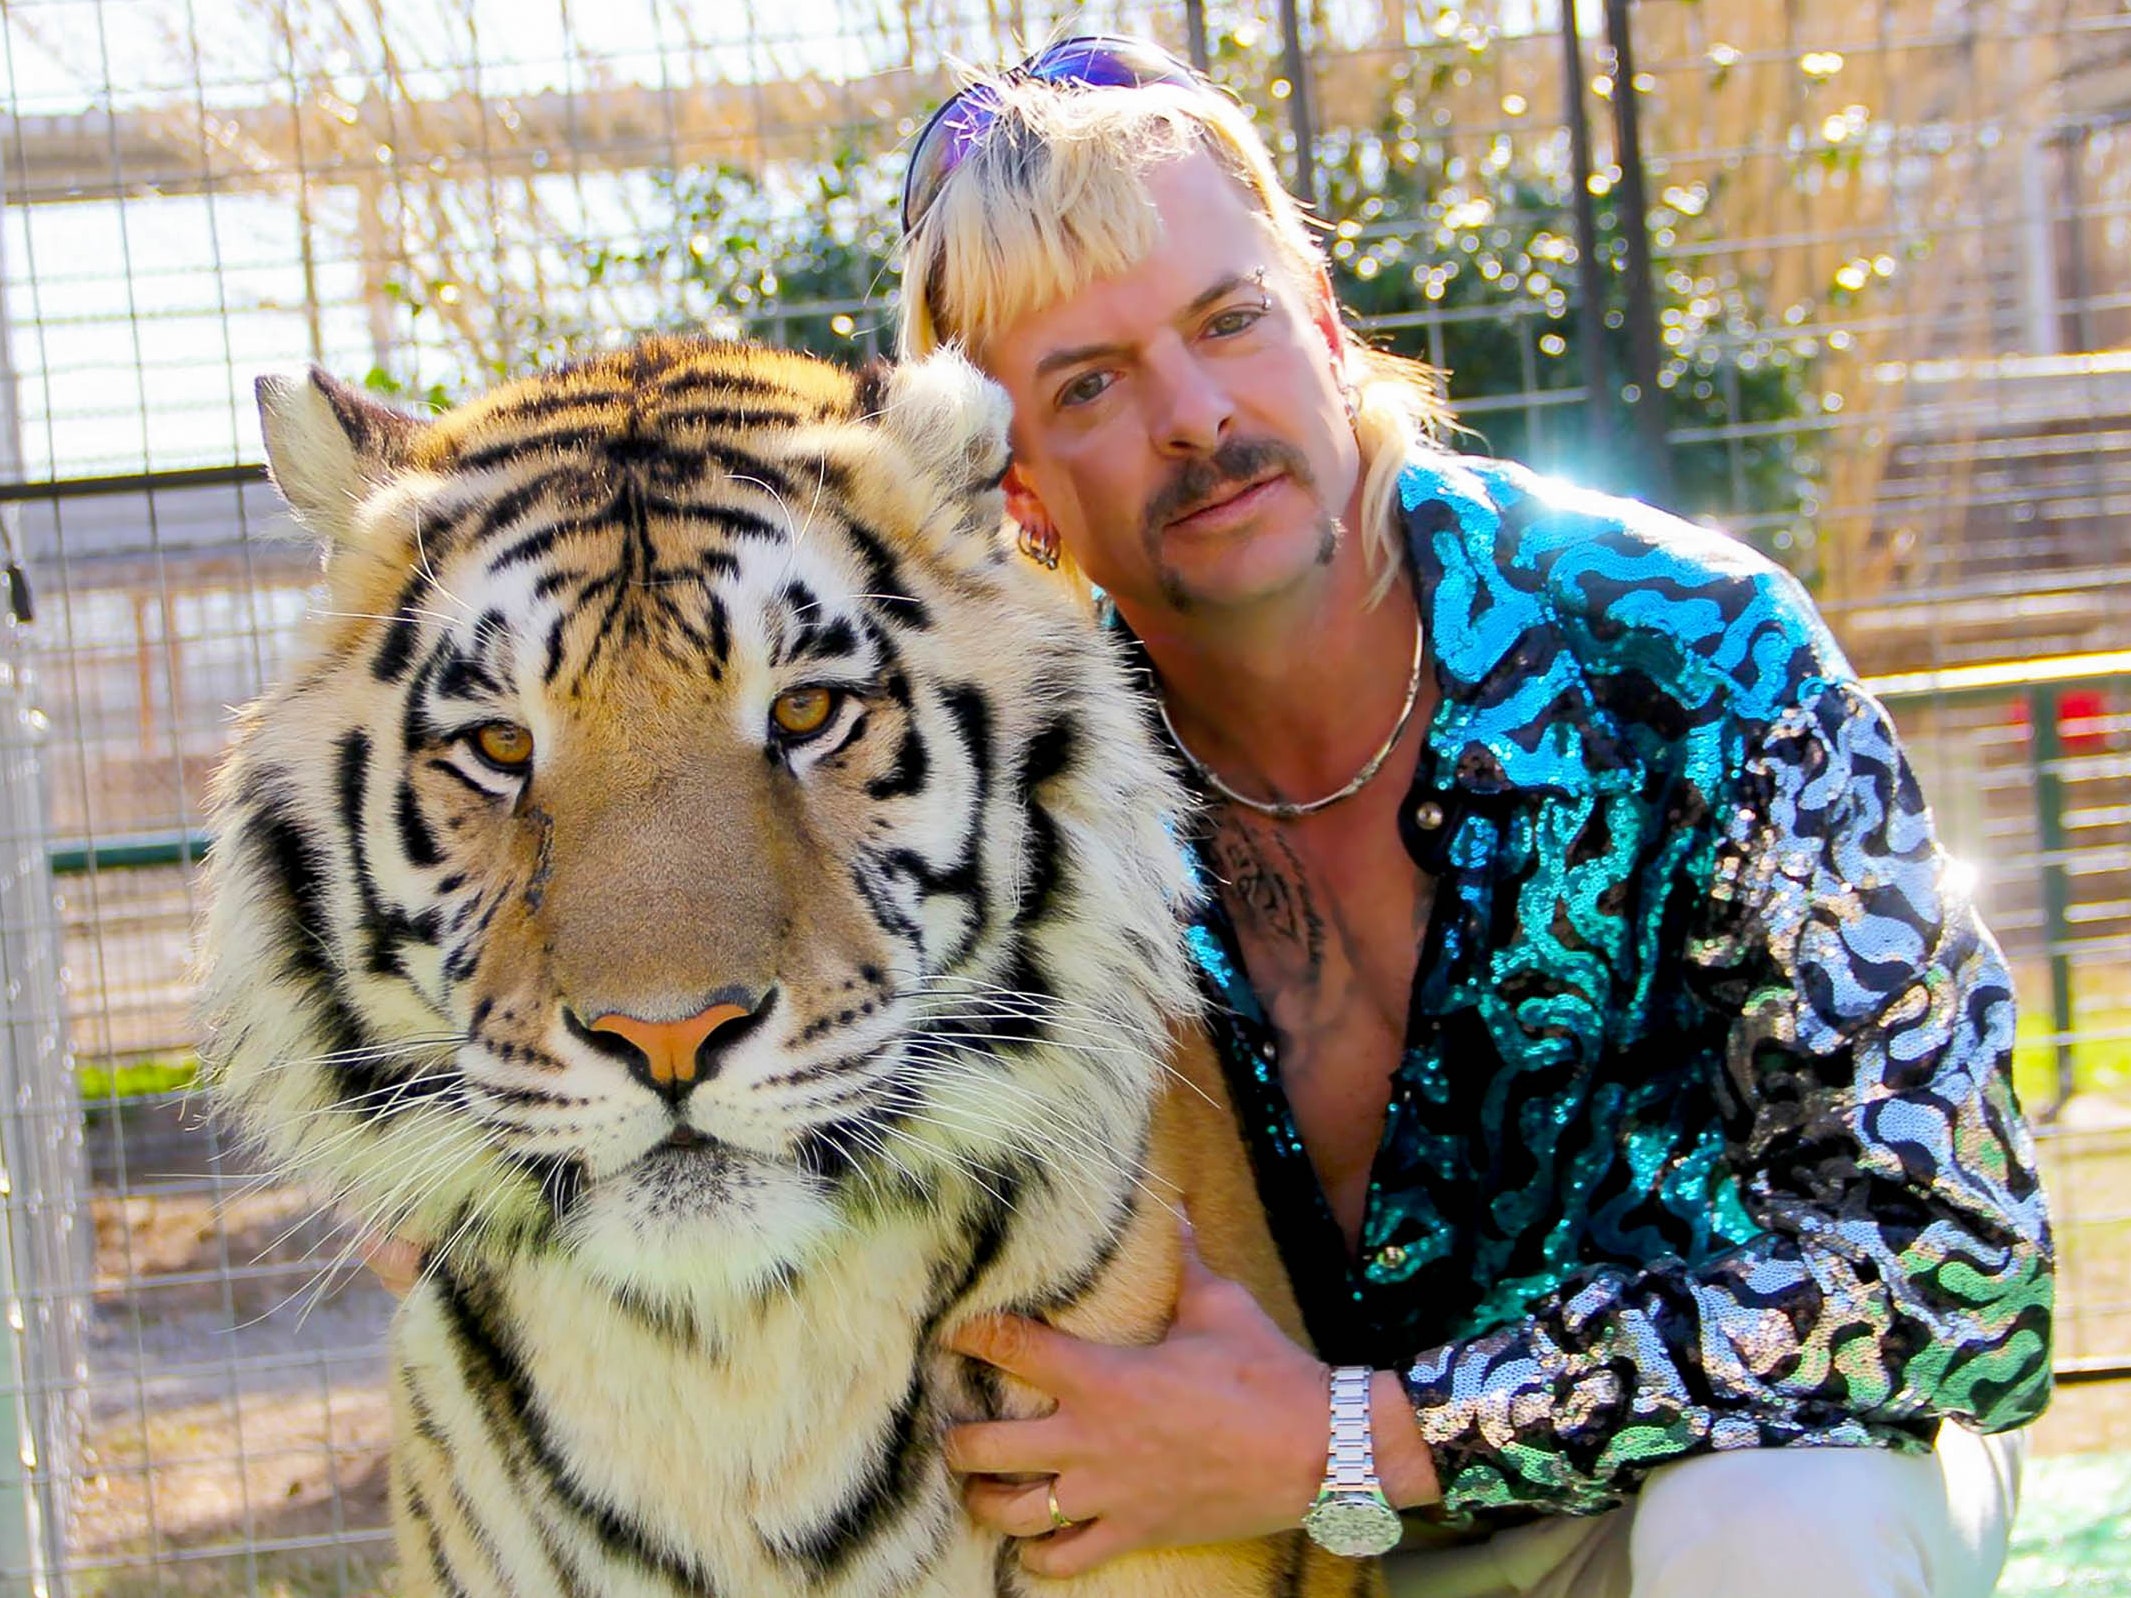 image of Joe Exotic from Tiger King with a tiger